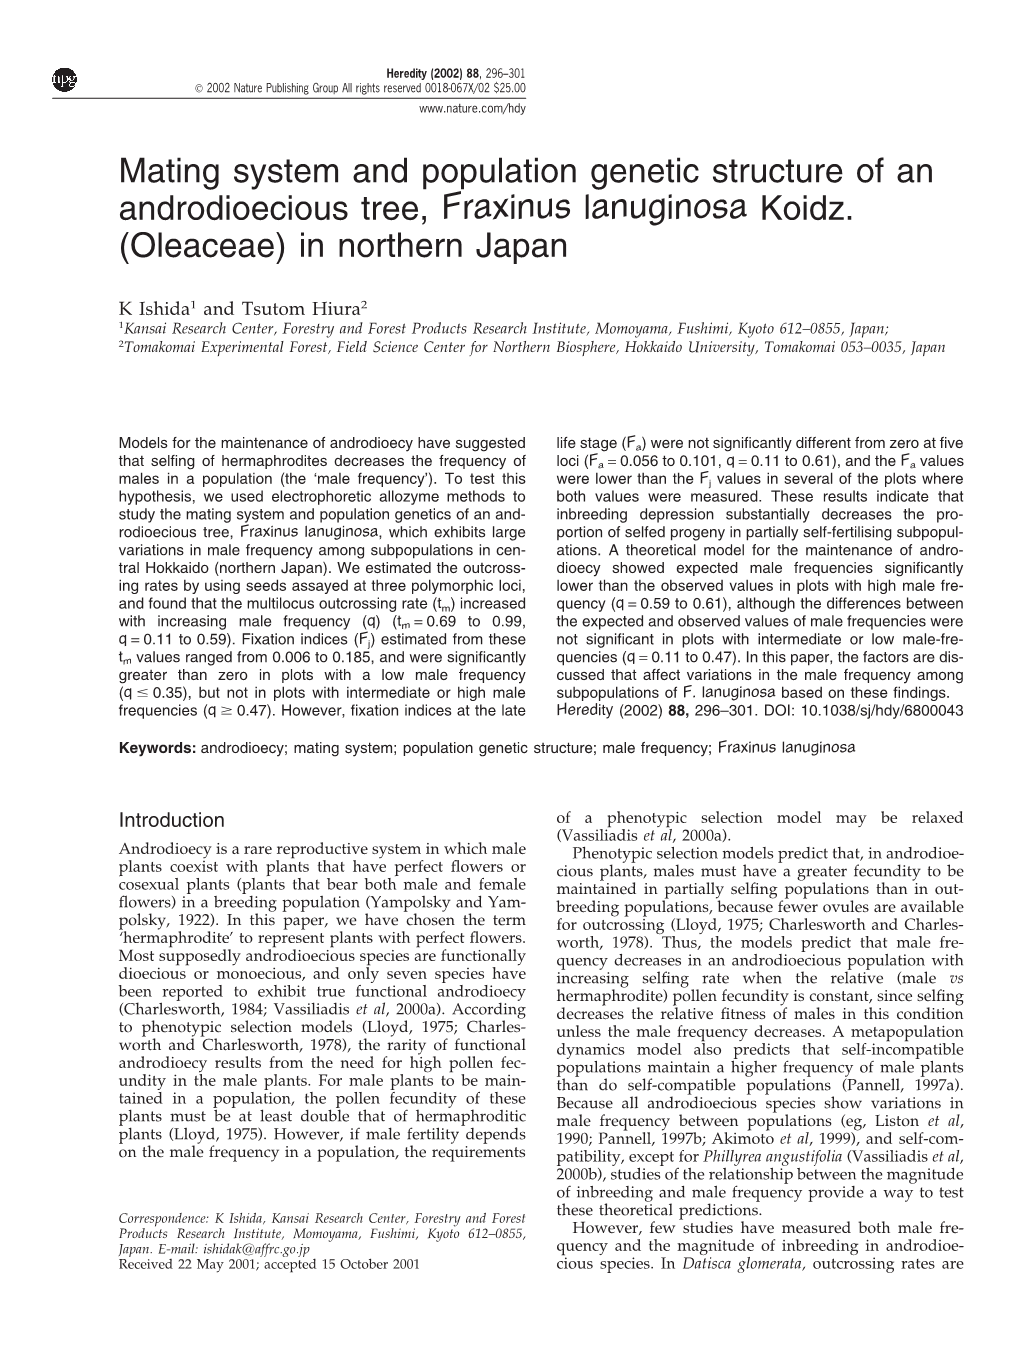 Mating System and Population Genetic Structure of an Androdioecious Tree, Fraxinus Lanuginosa Koidz